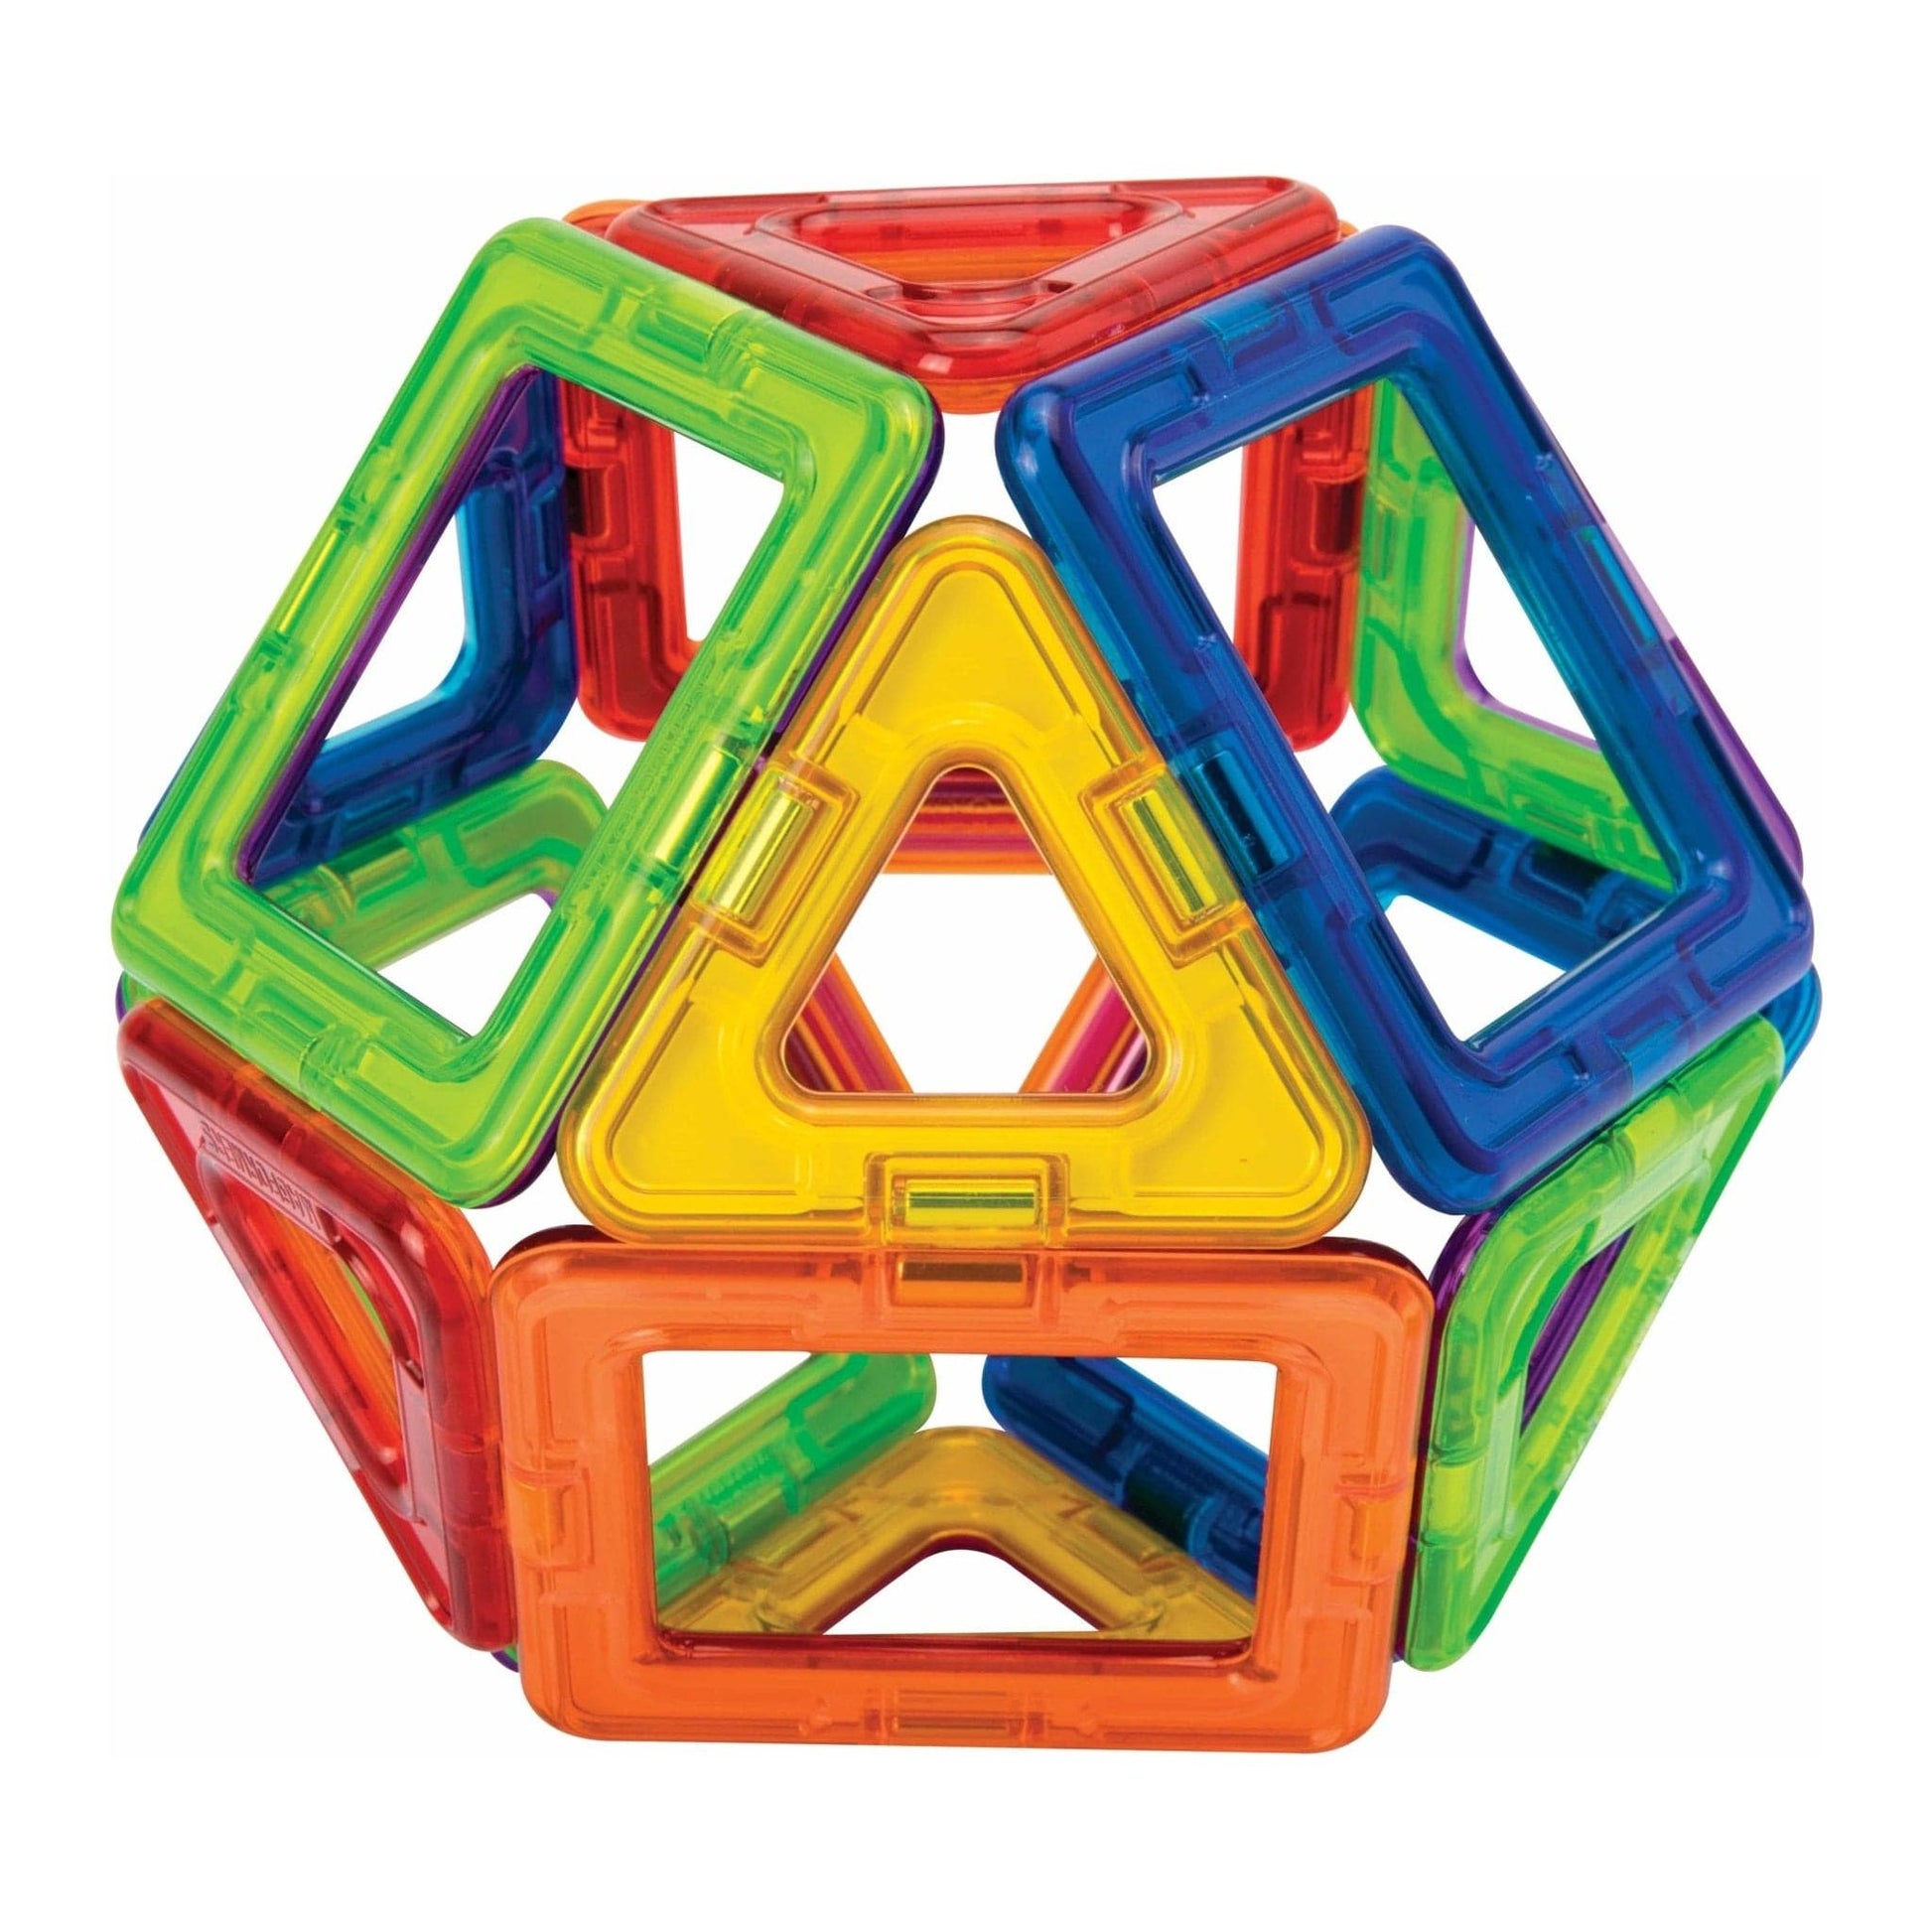 close up of cuboctahedron made using Magformers Construction Toys Basic 42 Piece Set + Storage Box